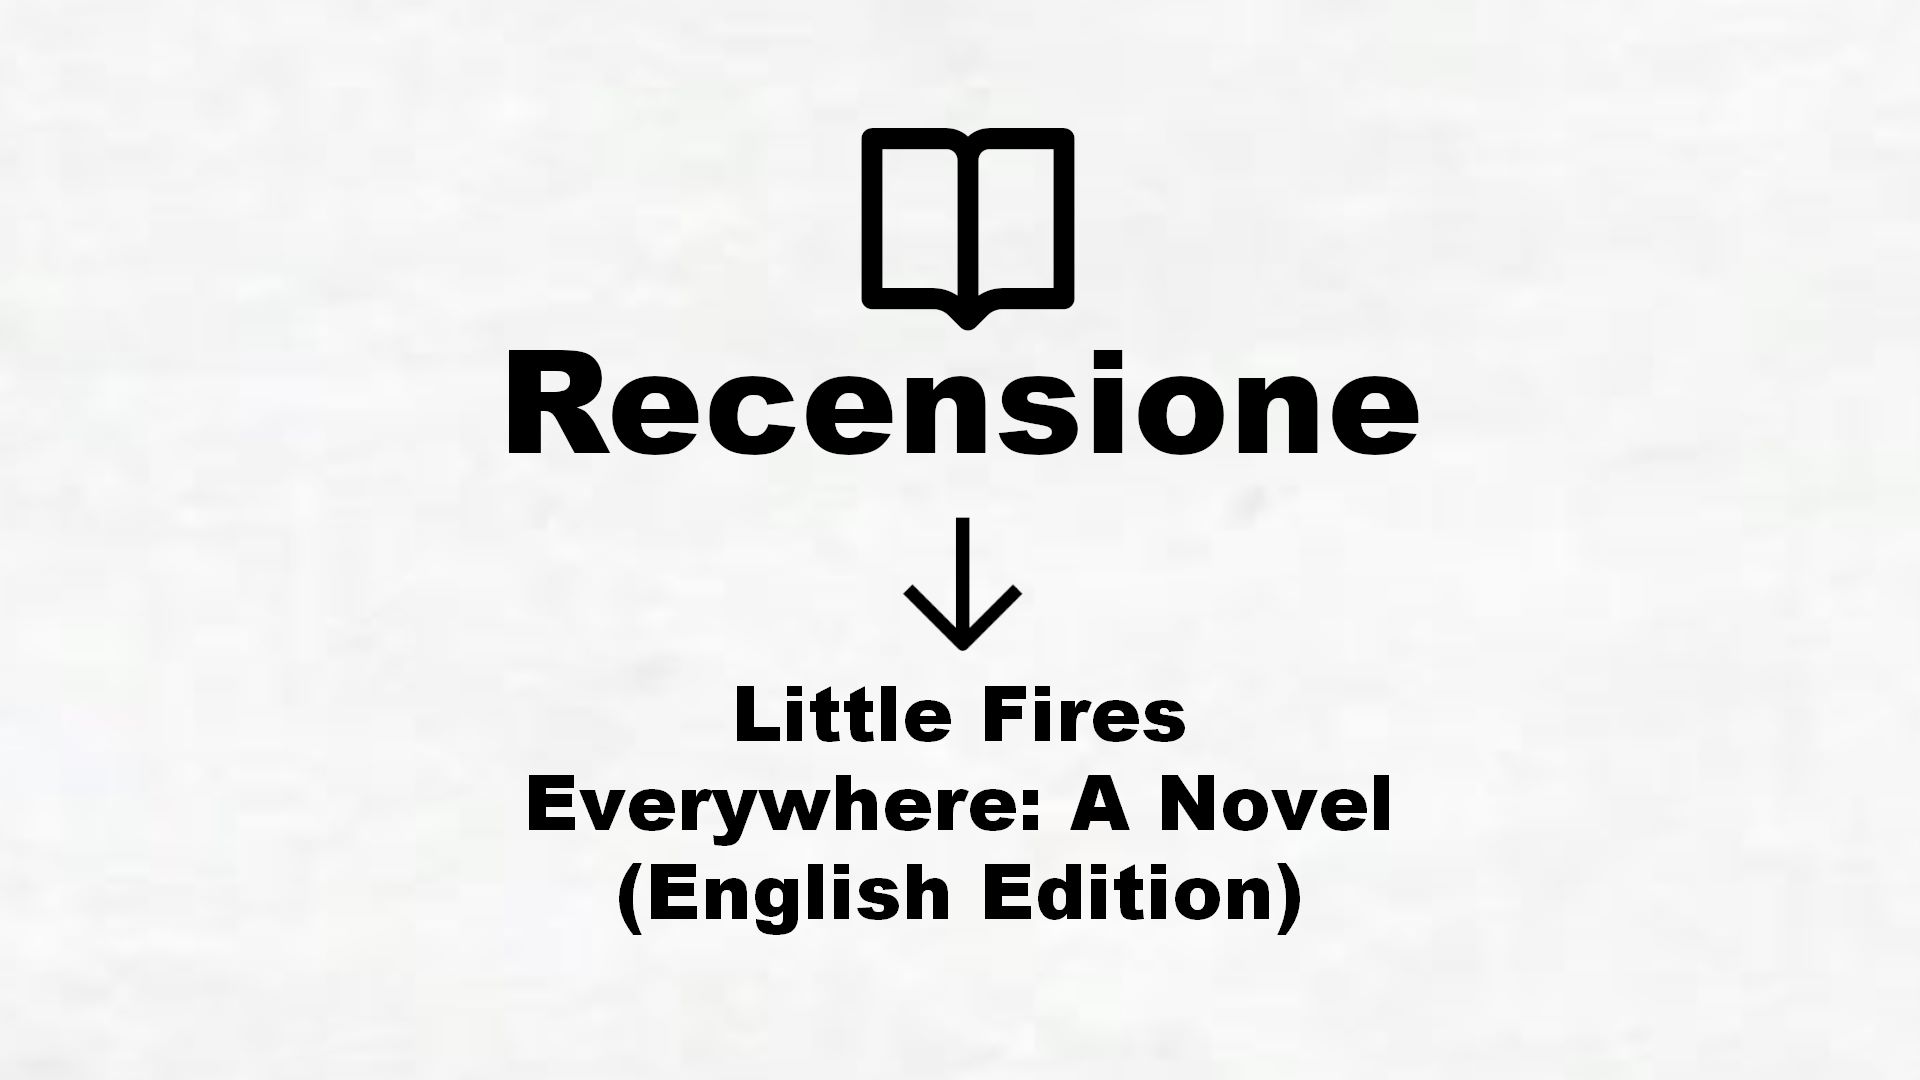 Little Fires Everywhere: A Novel (English Edition) – Recensione Libro